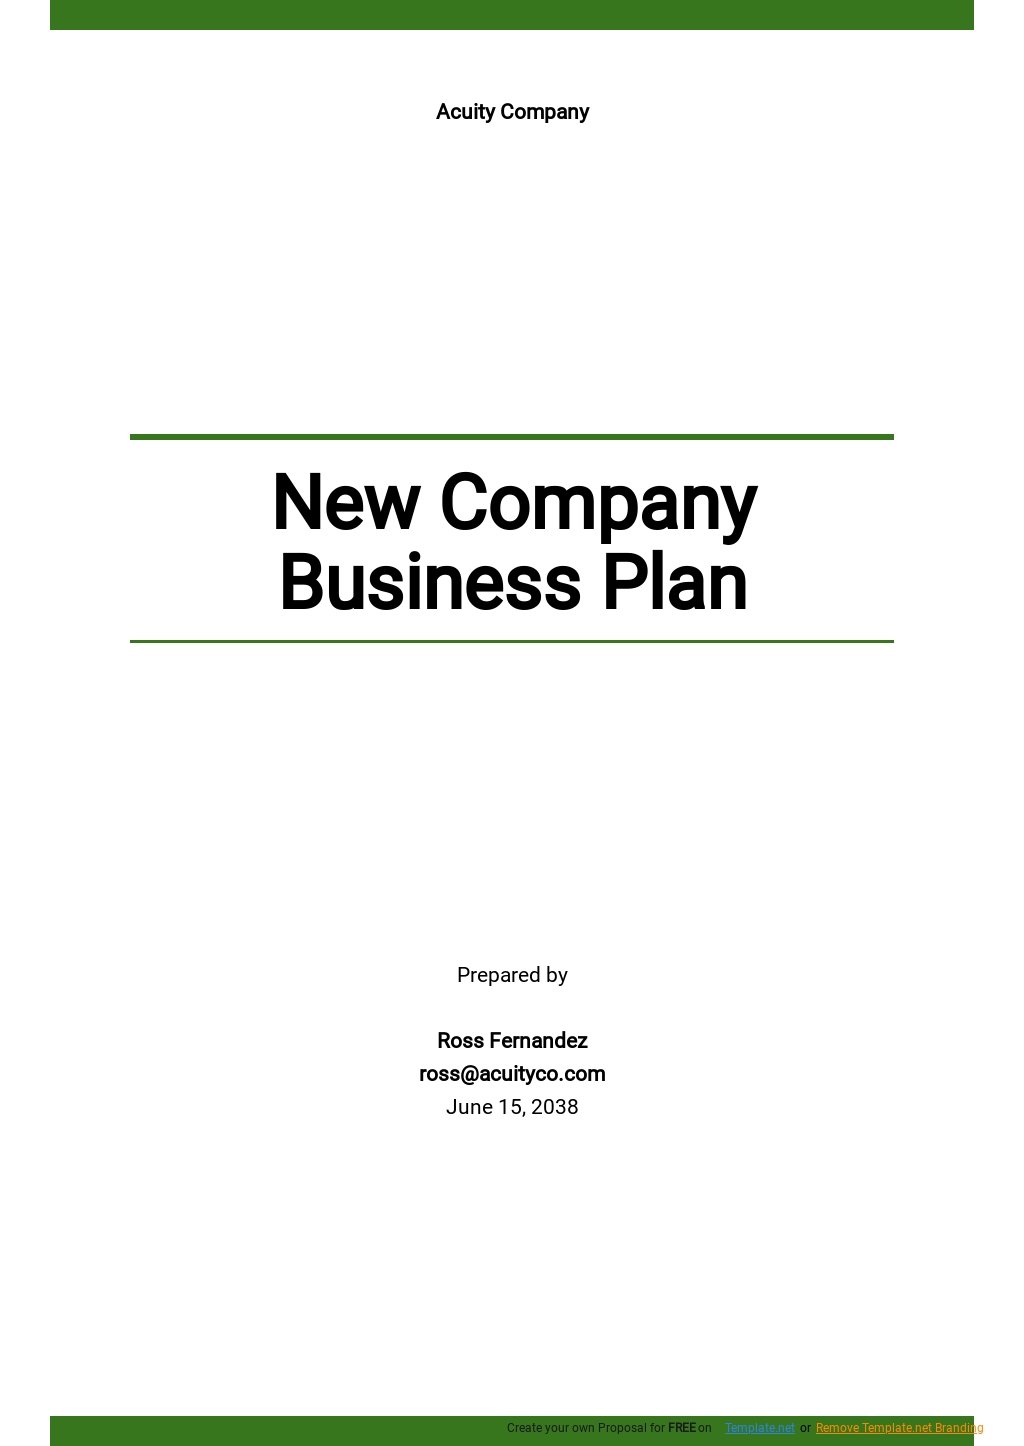 business plan for new company